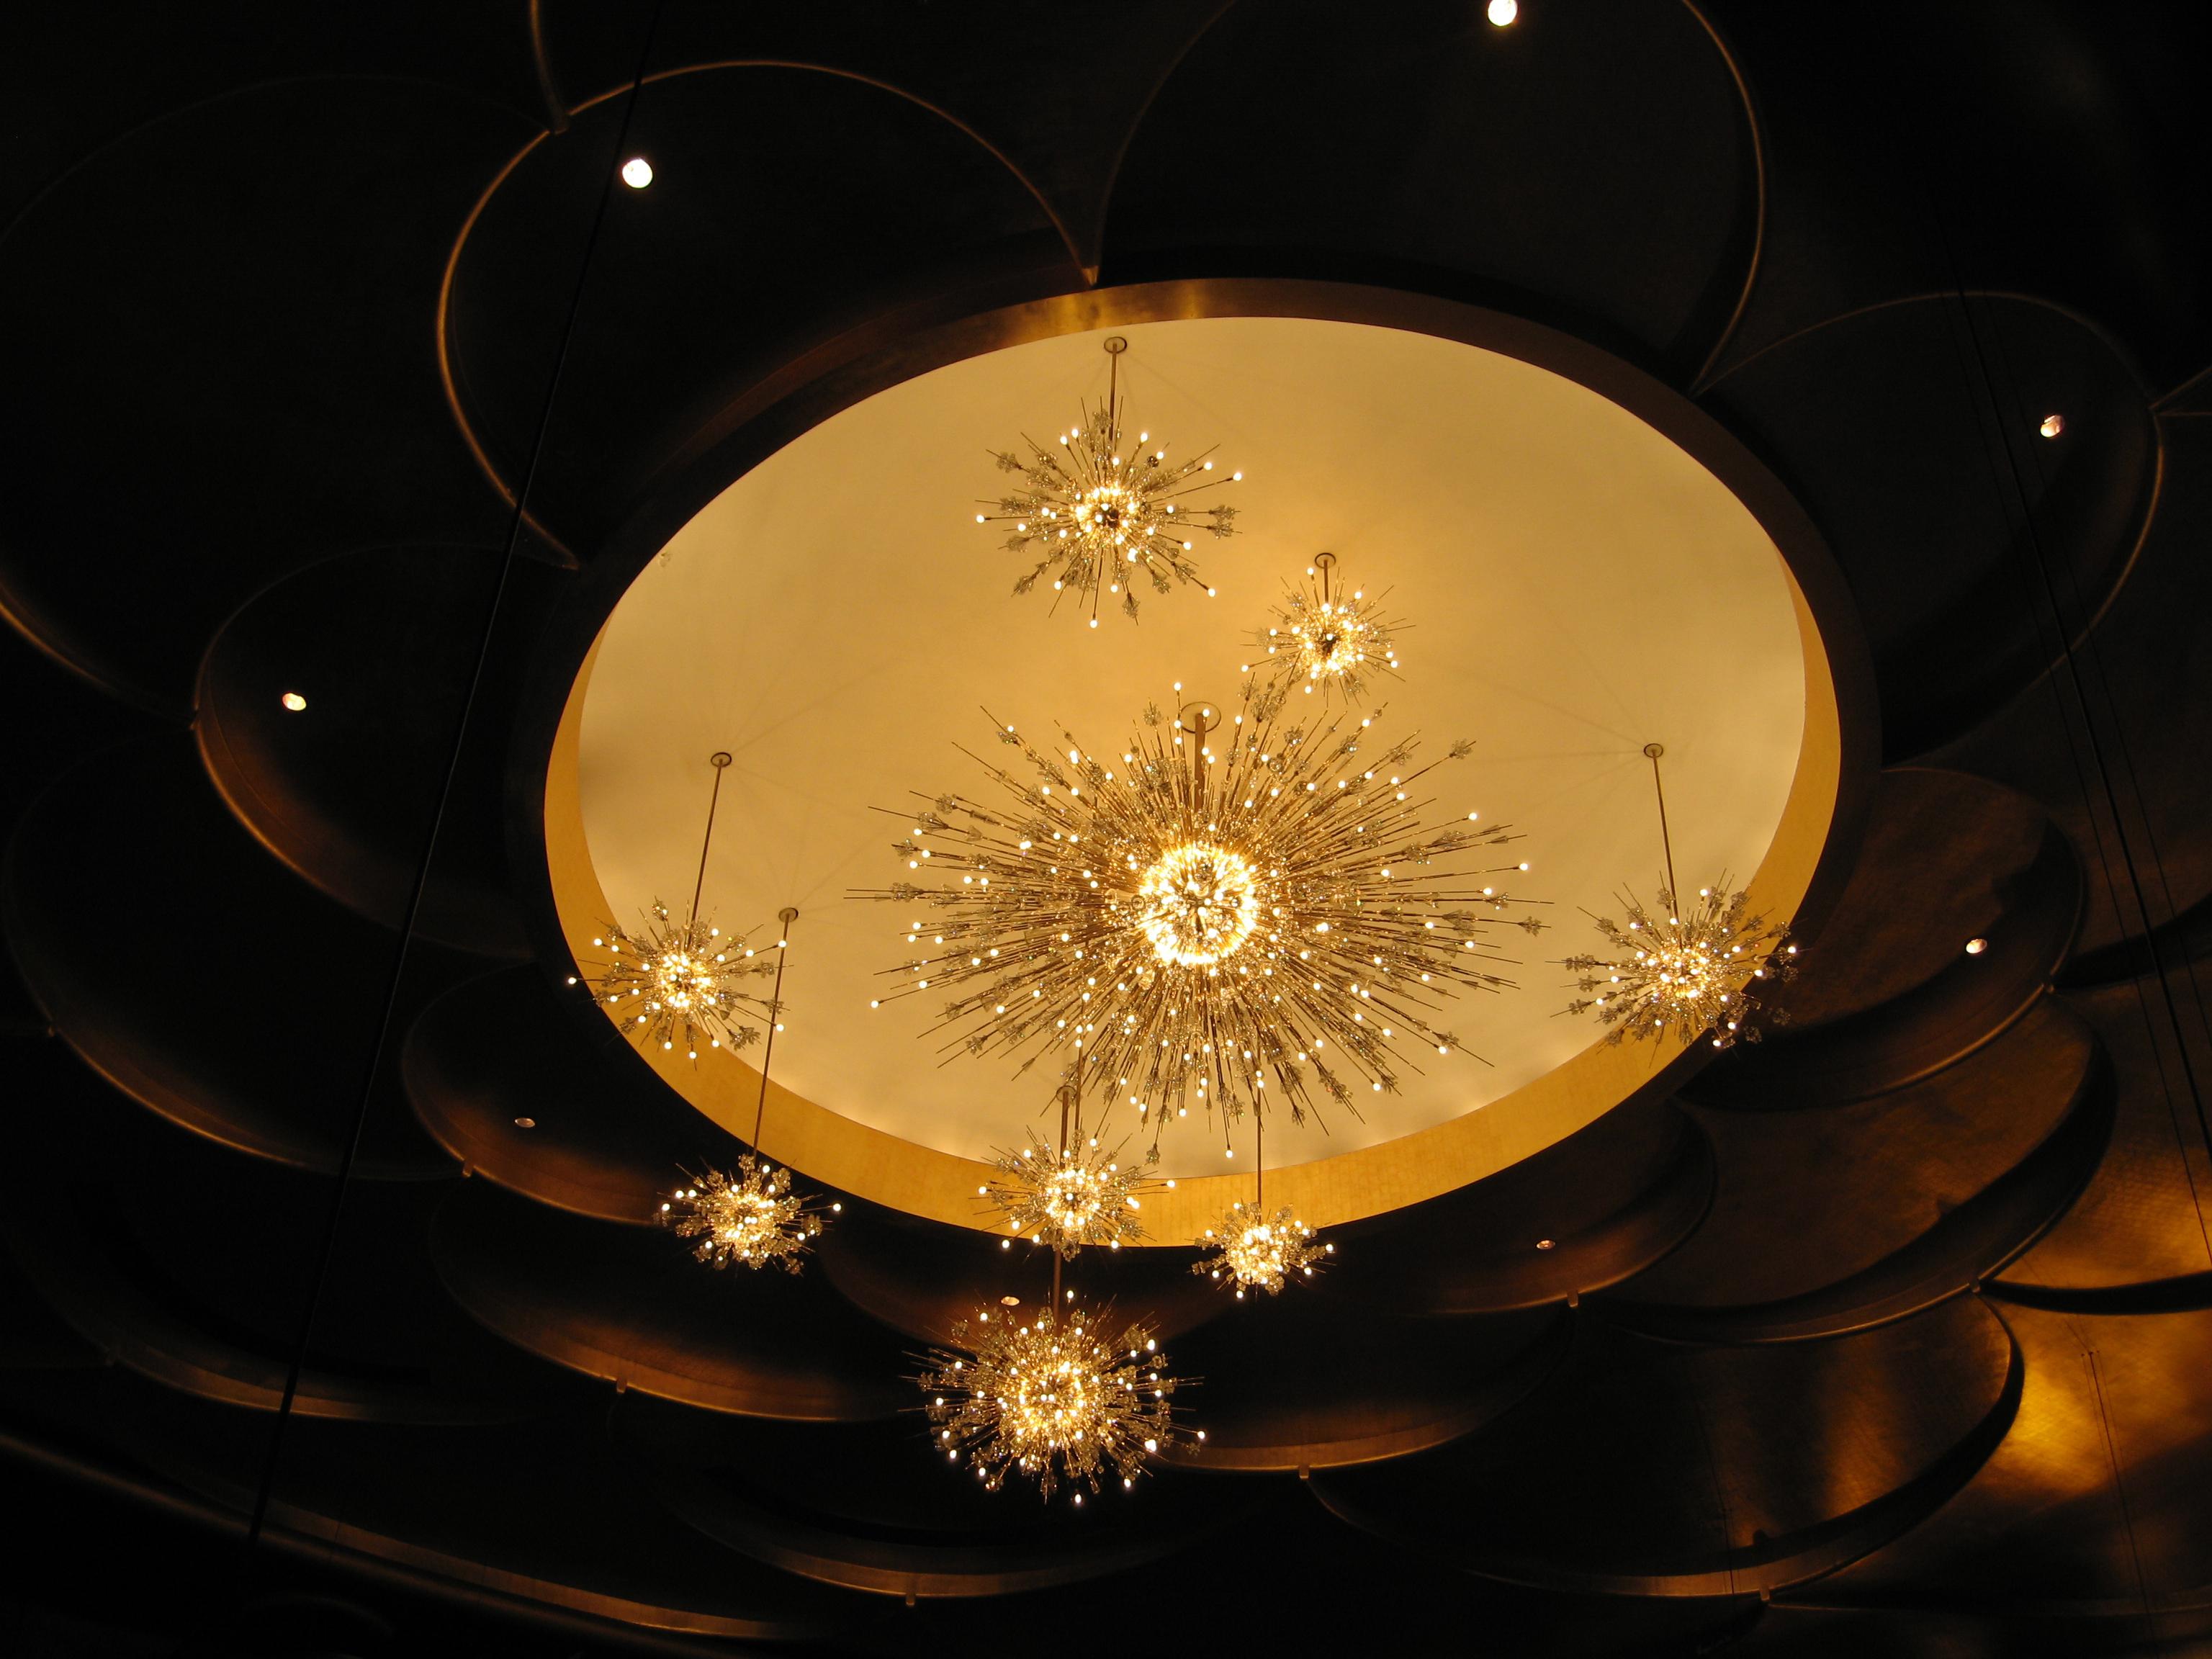 Lobmeyr Metropolitan Opera Crystal Chandelier Auditorium 6660-L-26 In New Condition For Sale In New York, NY